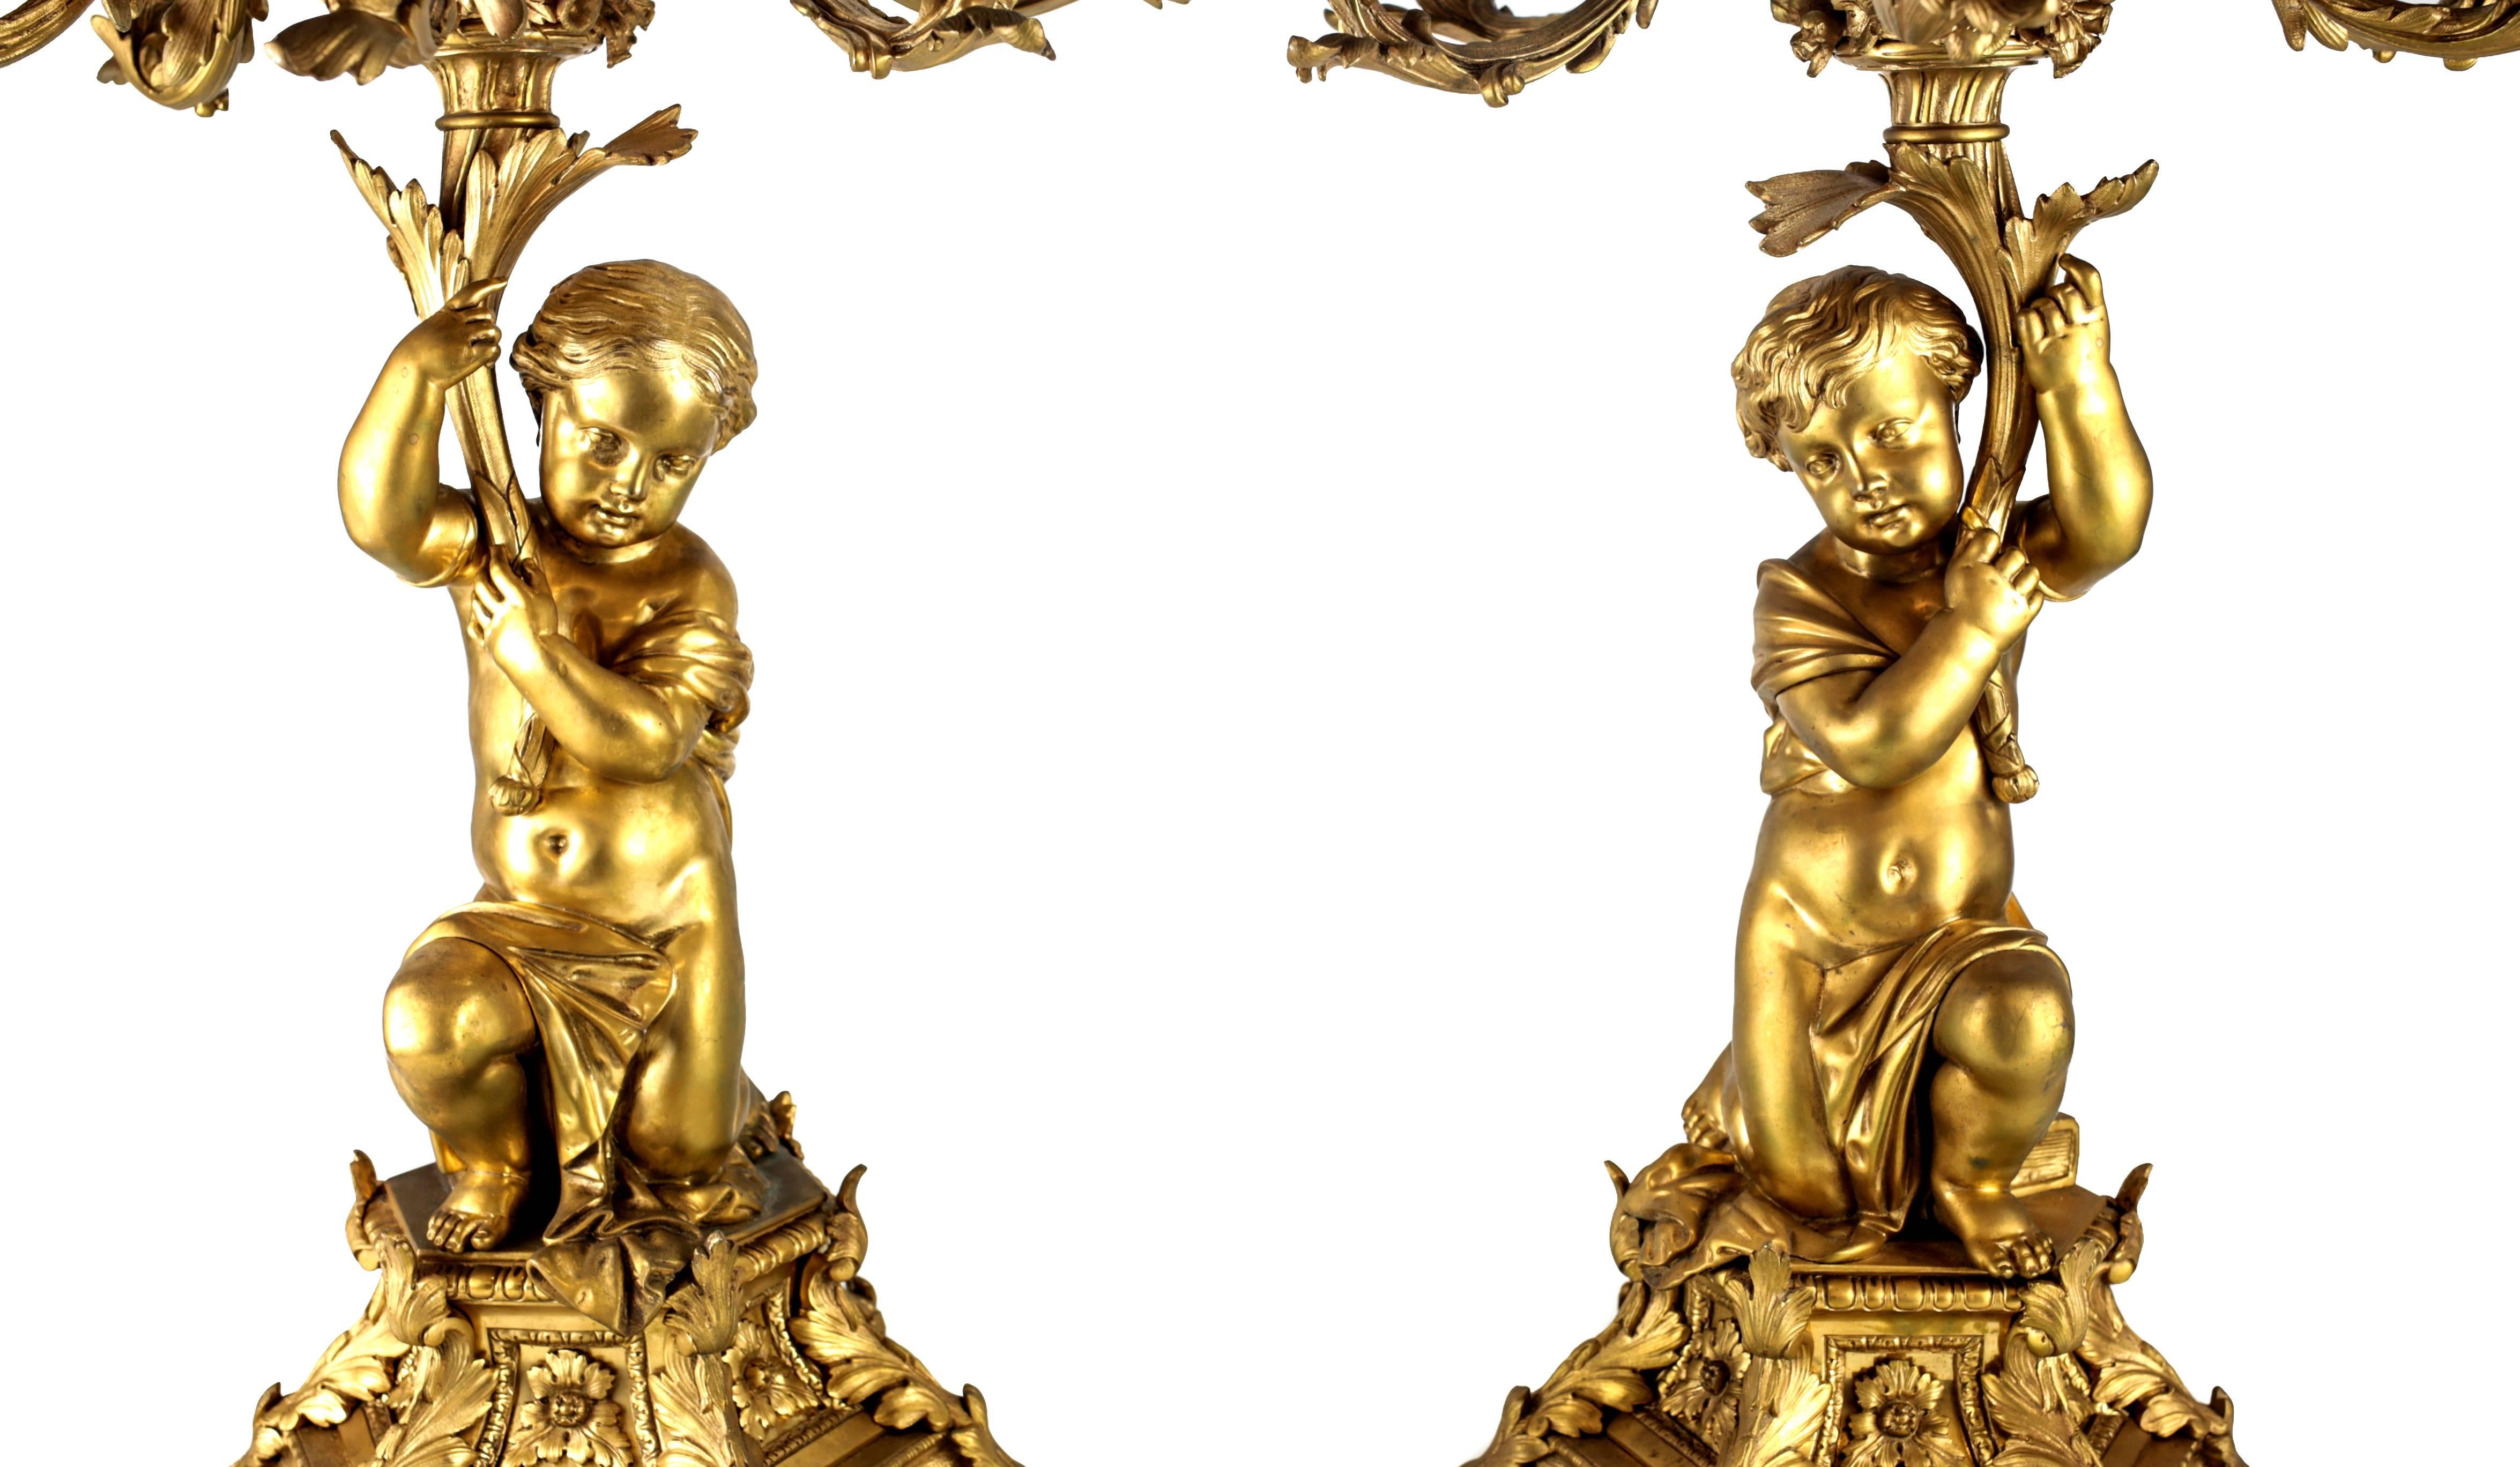 A fine and large pair of French gilt bronze candelabras each stationed with a prominent figure of a putti or cherub raising ten acanthus cast candle arms. The cloth draped figures sitting atop a stack of books, the hexagonal shaped base with foliate